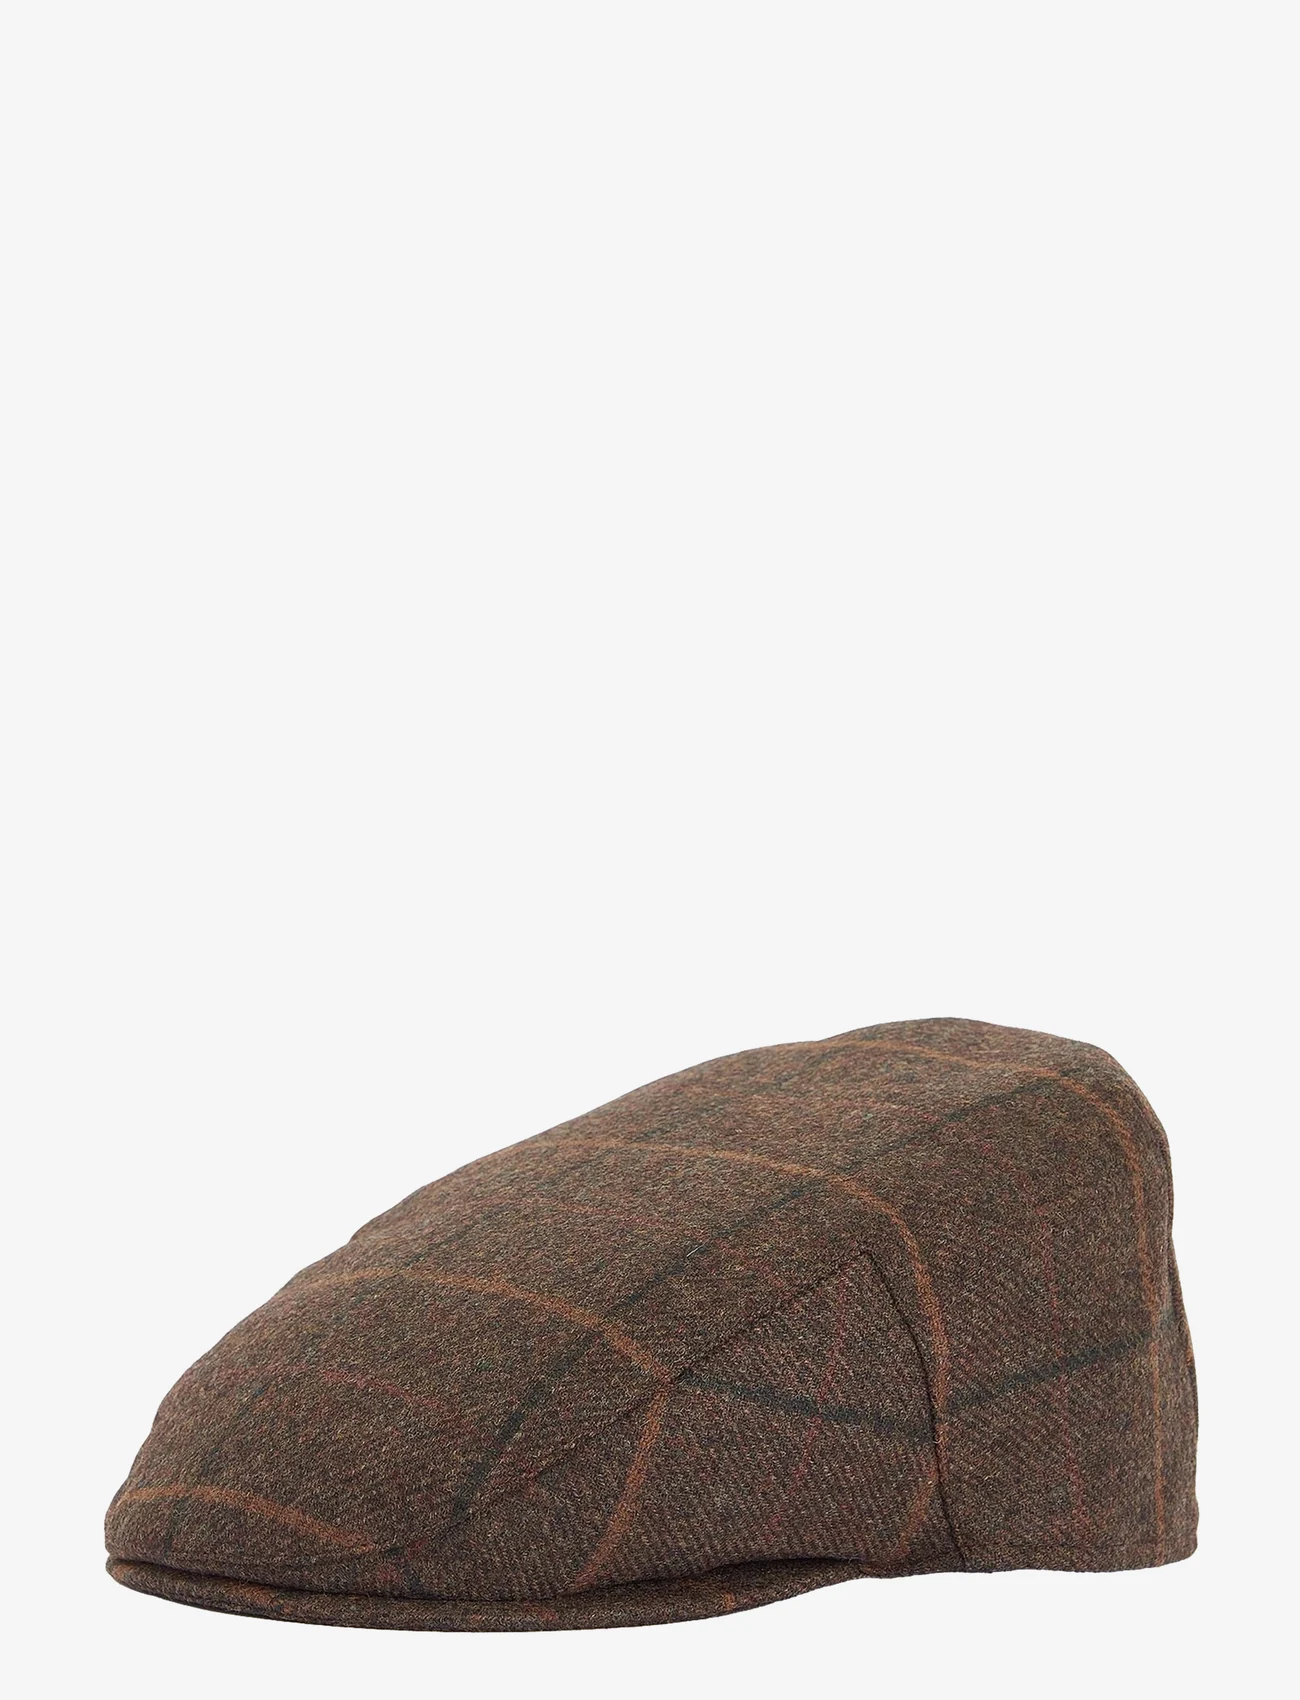 Barbour - Barbour Crief Flat Cap - sixpence - brown - 0